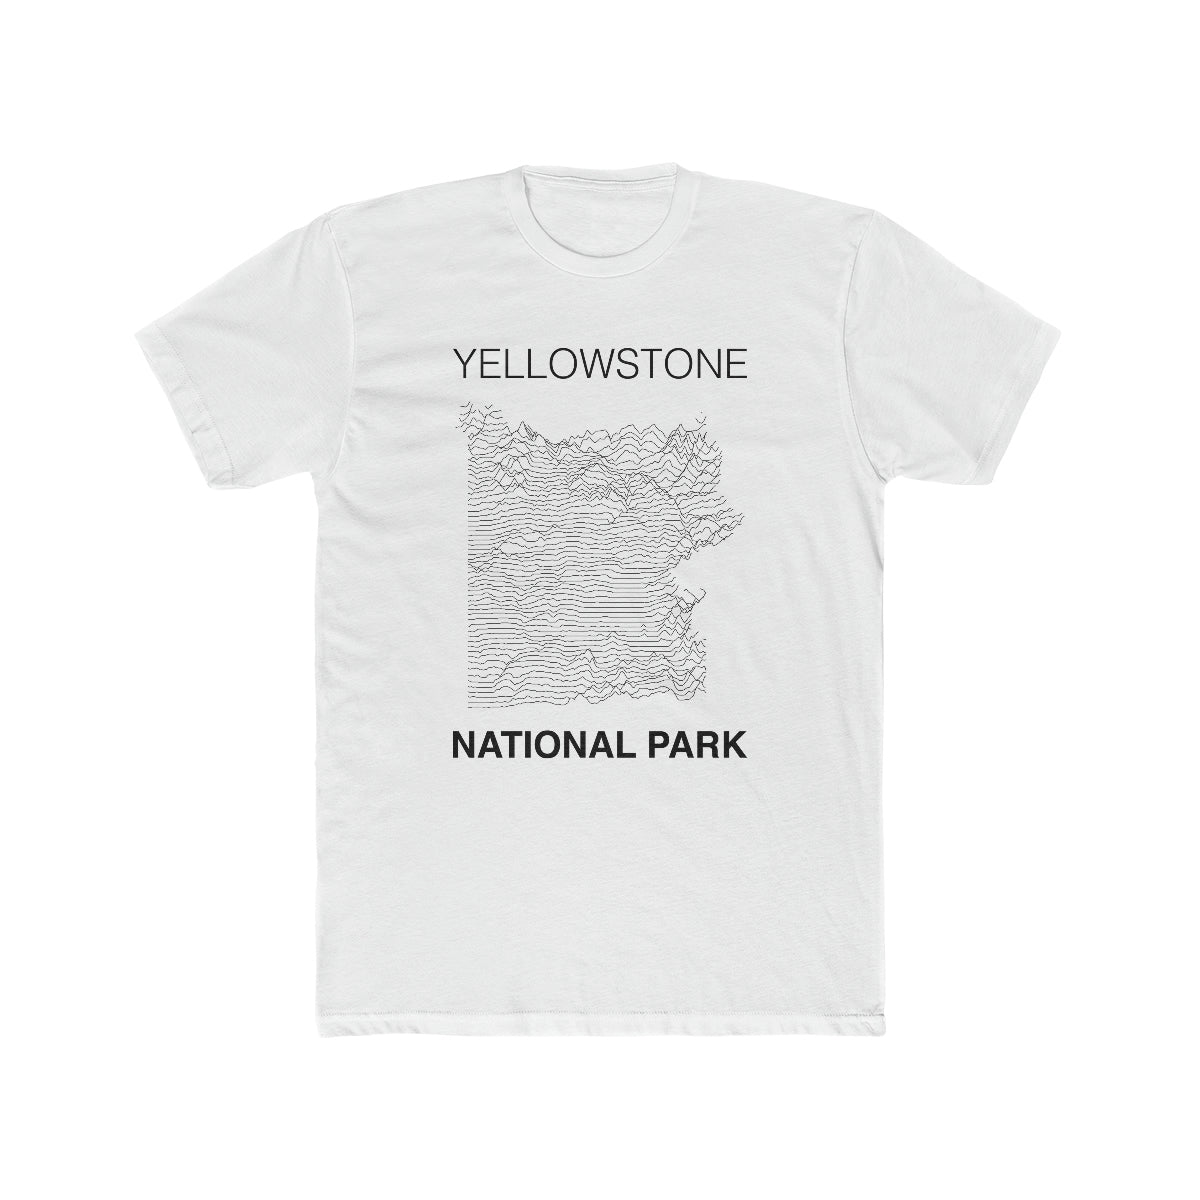 Yellowstone National Park T-Shirt Lines